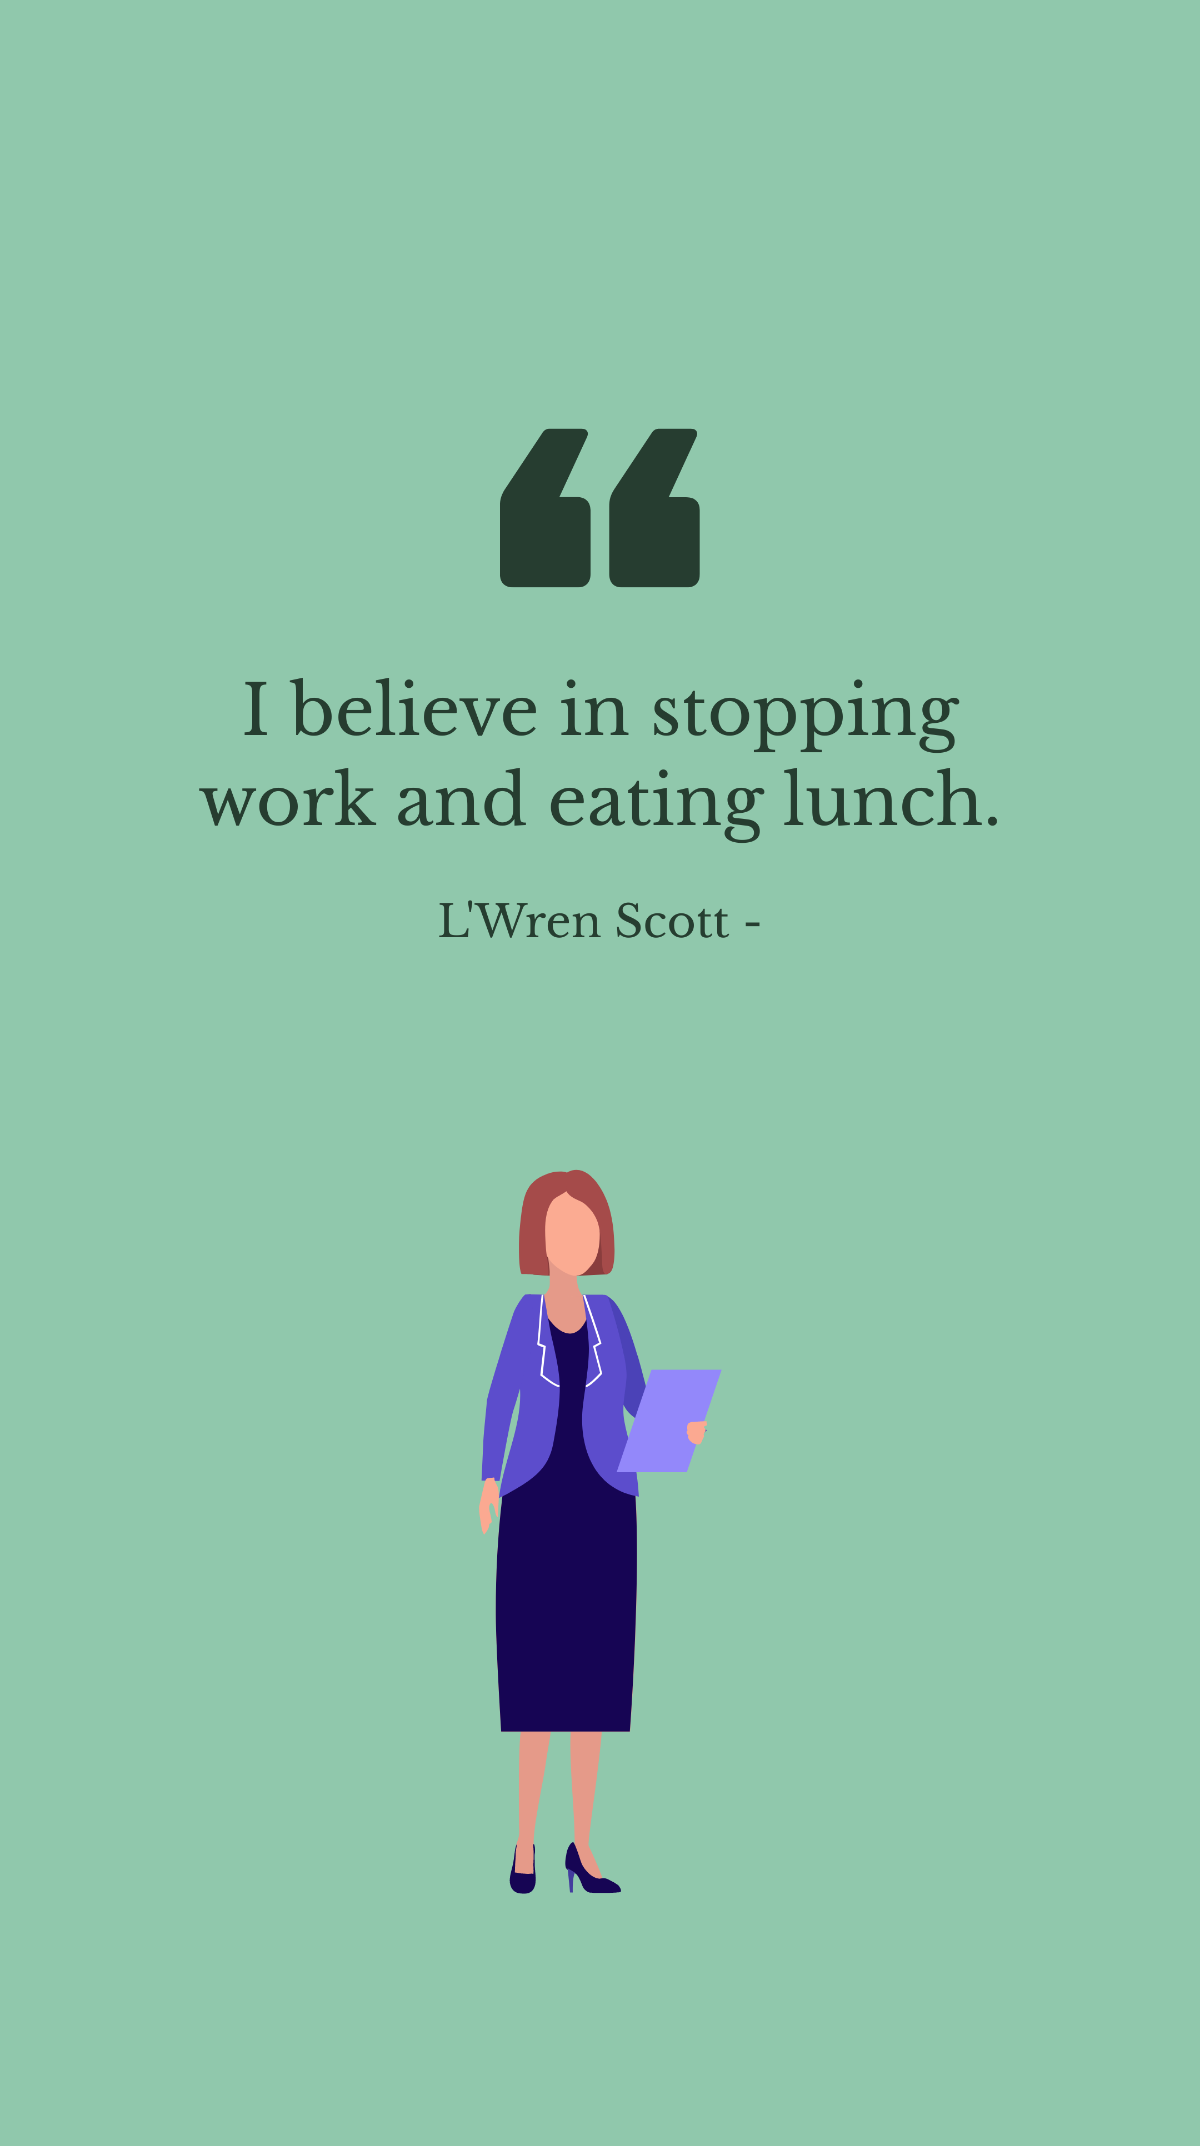 L'Wren Scott - I believe in stopping work and eating lunch. Template